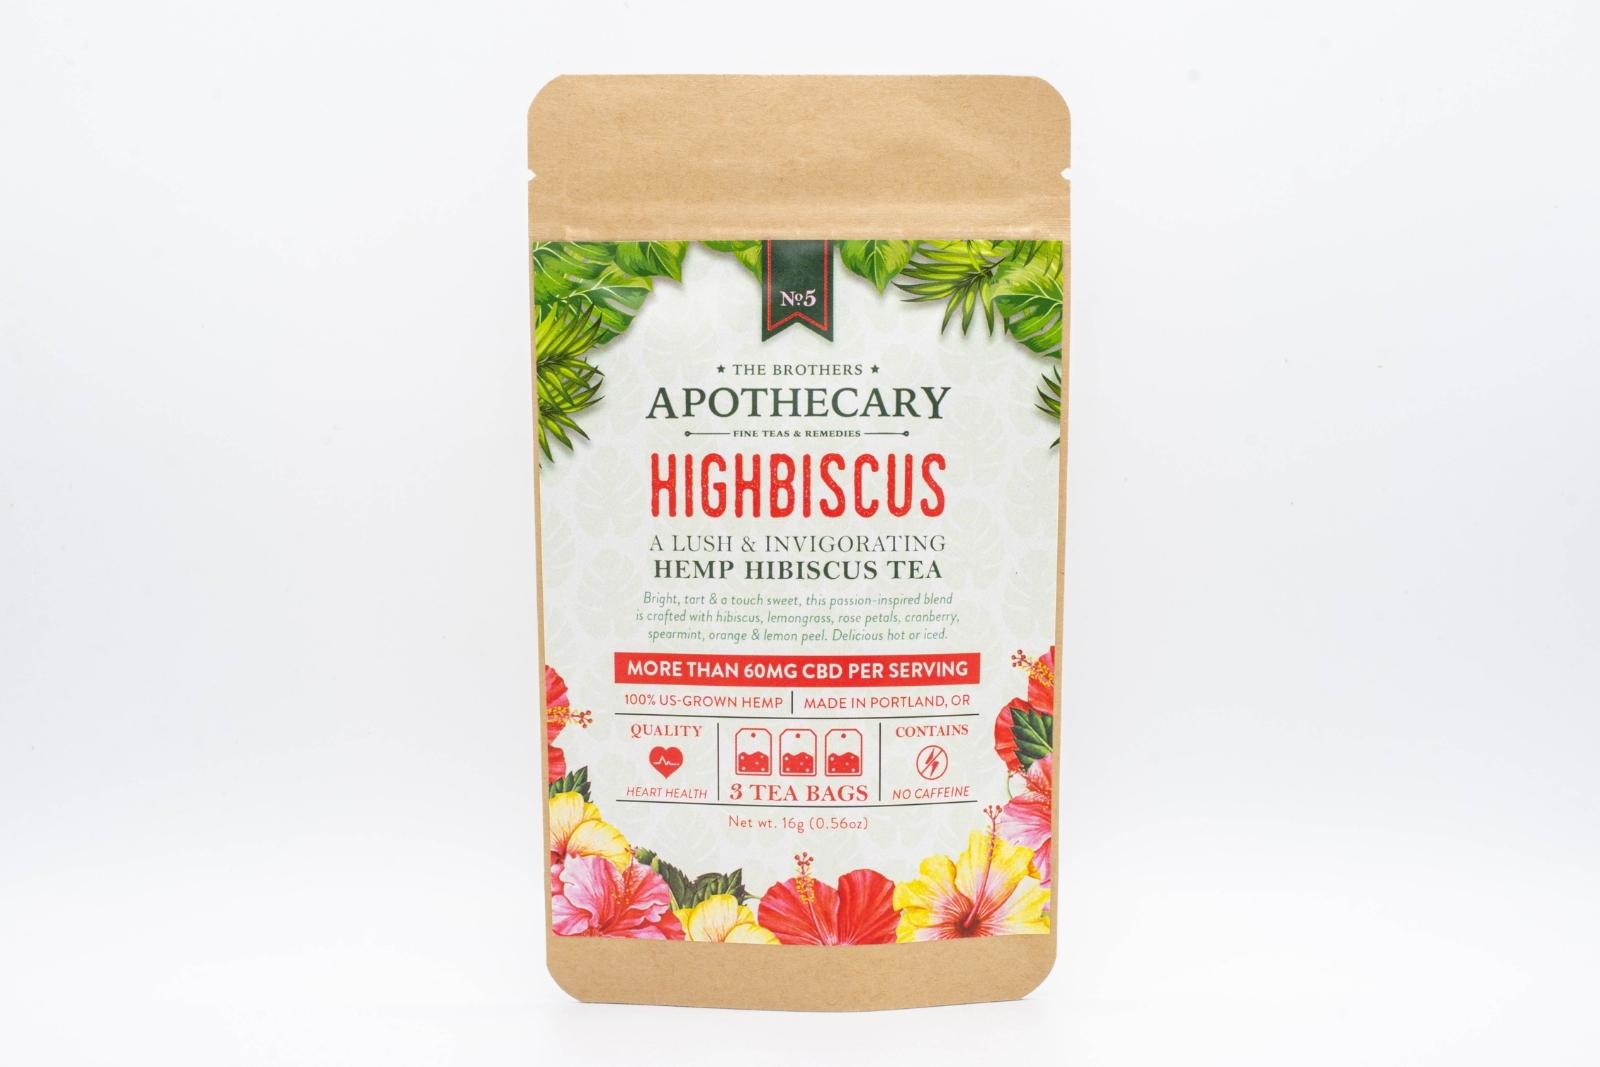 A large packet of The Brothers Apothecary's Highbiscus Tea on a white background